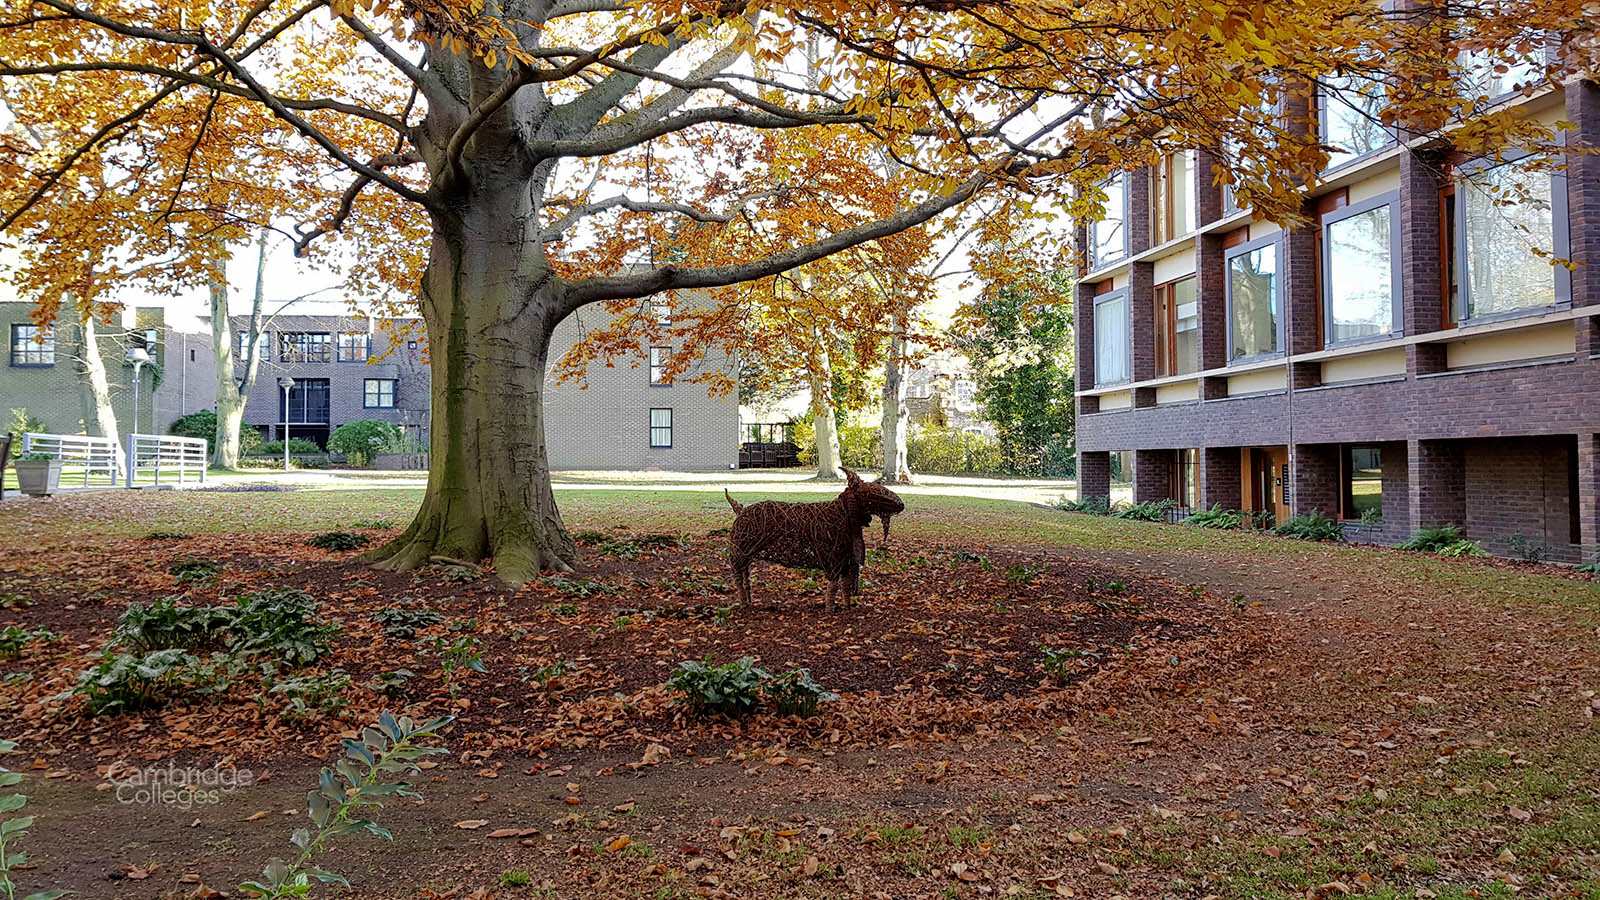 Fitzbilly in the grounds of Fiztwilliam college, Cambridge